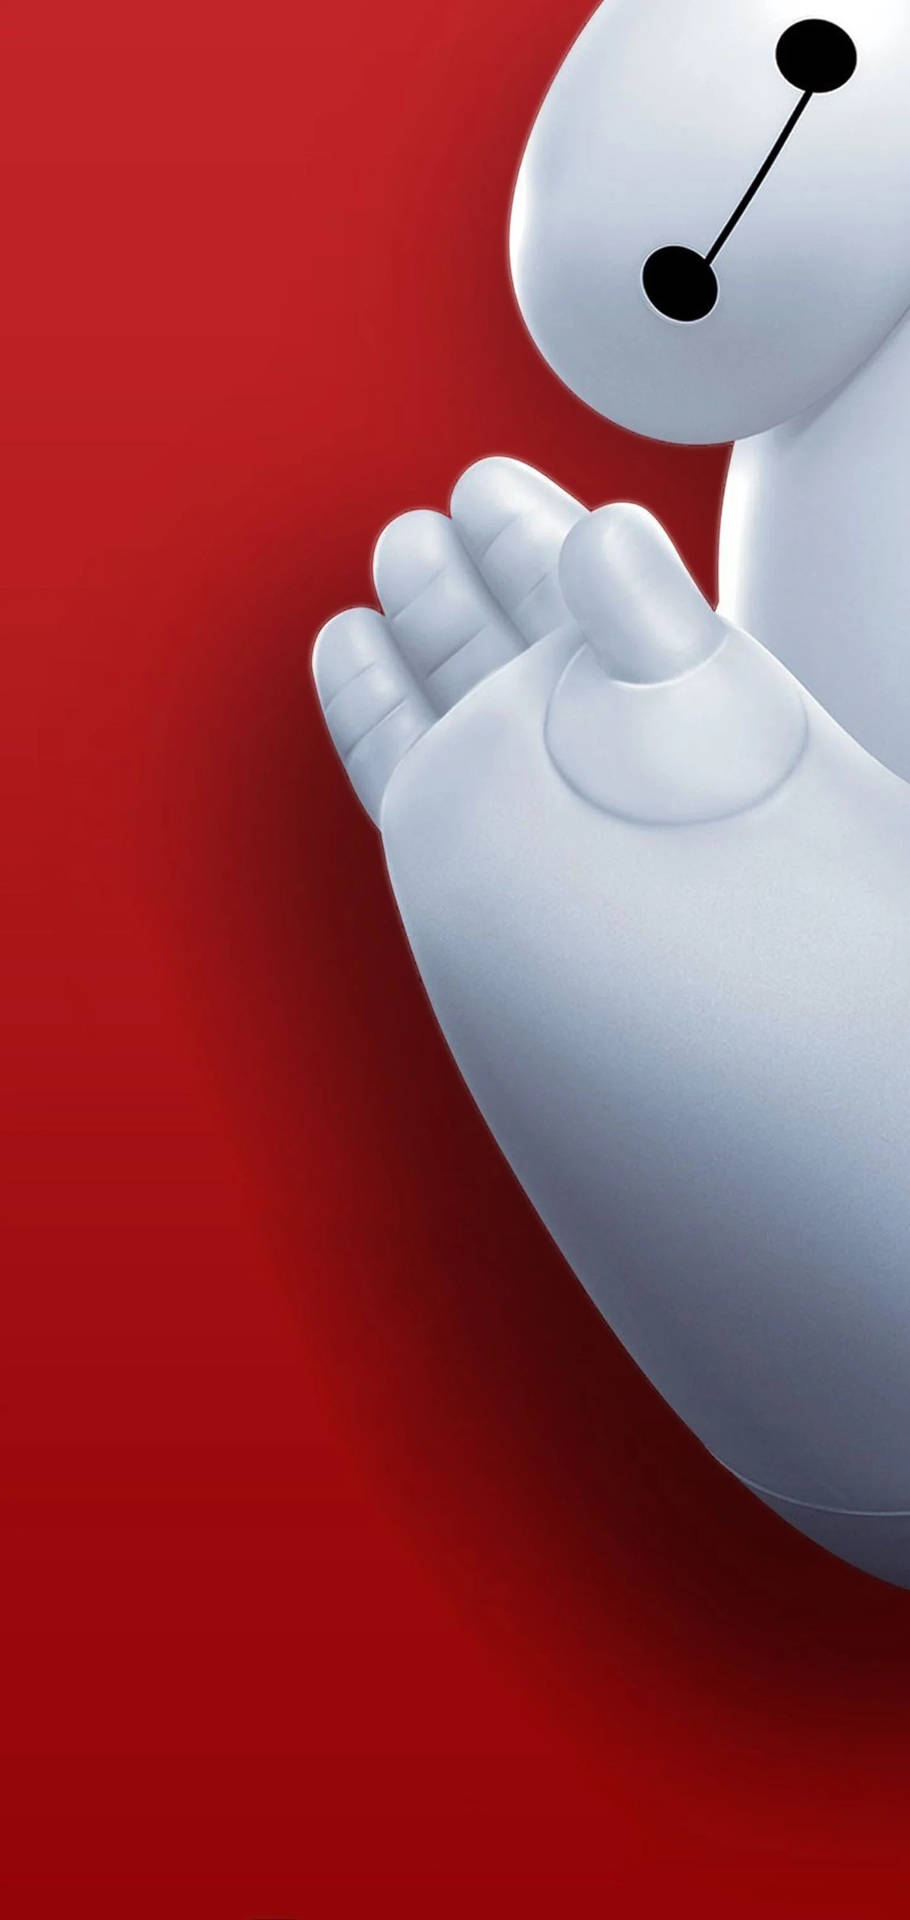 Free Baymax Wallpaper Downloads, [100+] Baymax Wallpapers for FREE |  